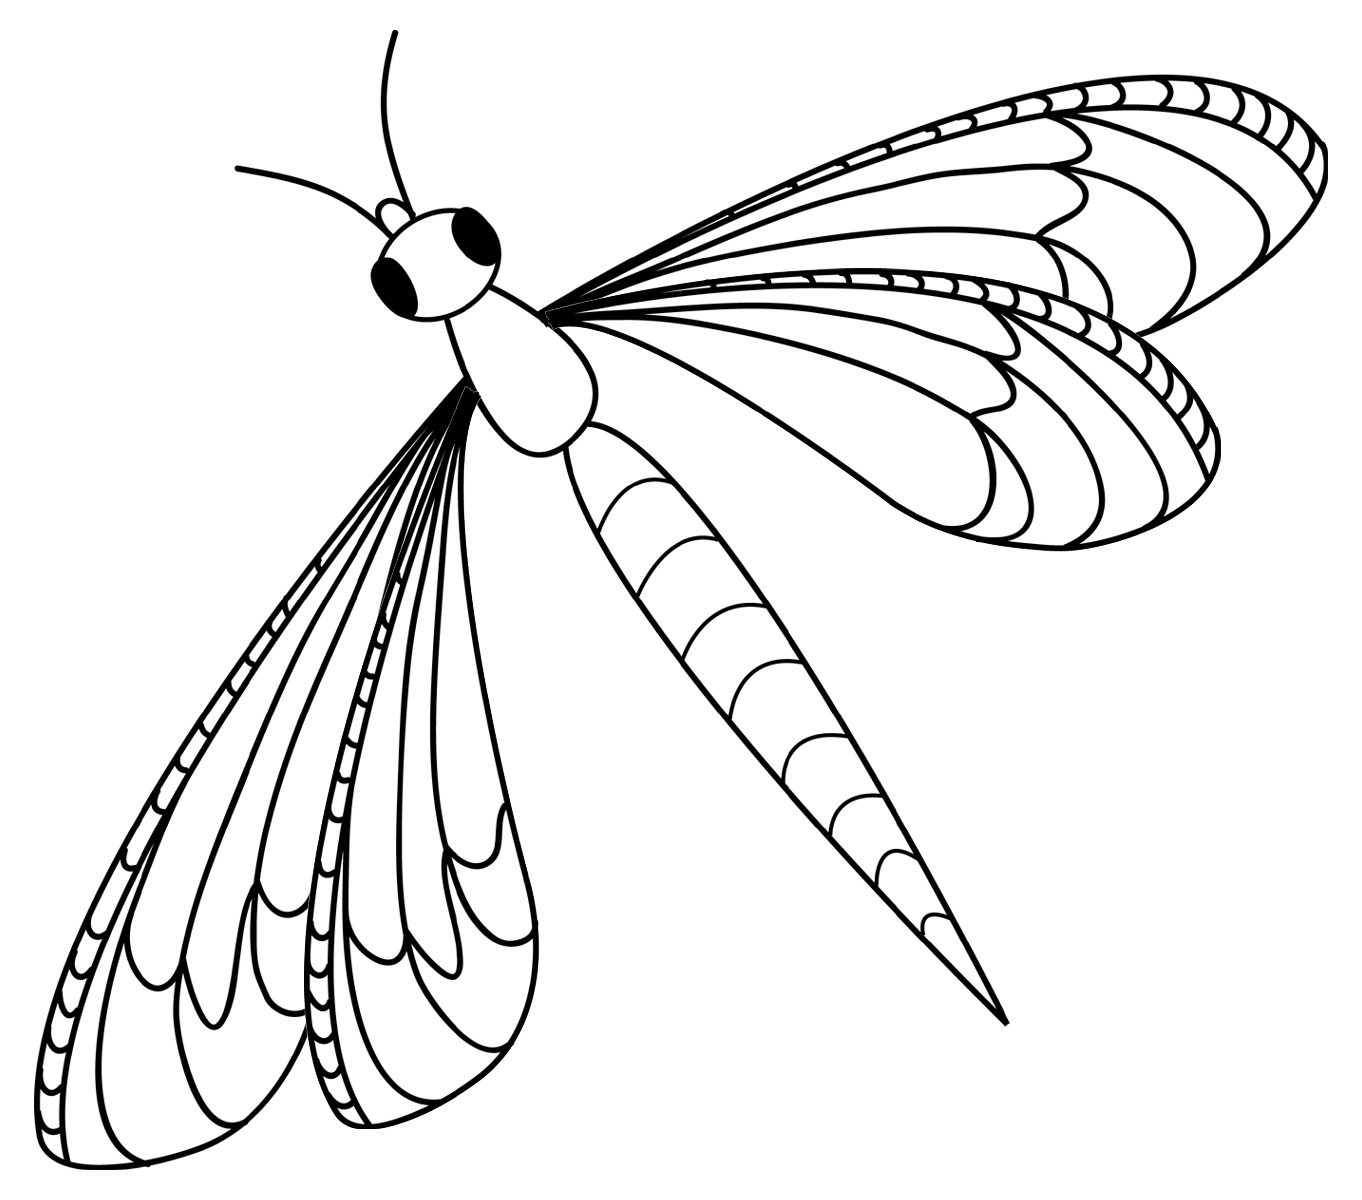 Free Dragonfly Outline, Download Free Clip Art, Free Clip Art On - Free Printable Pictures Of Dragonflies